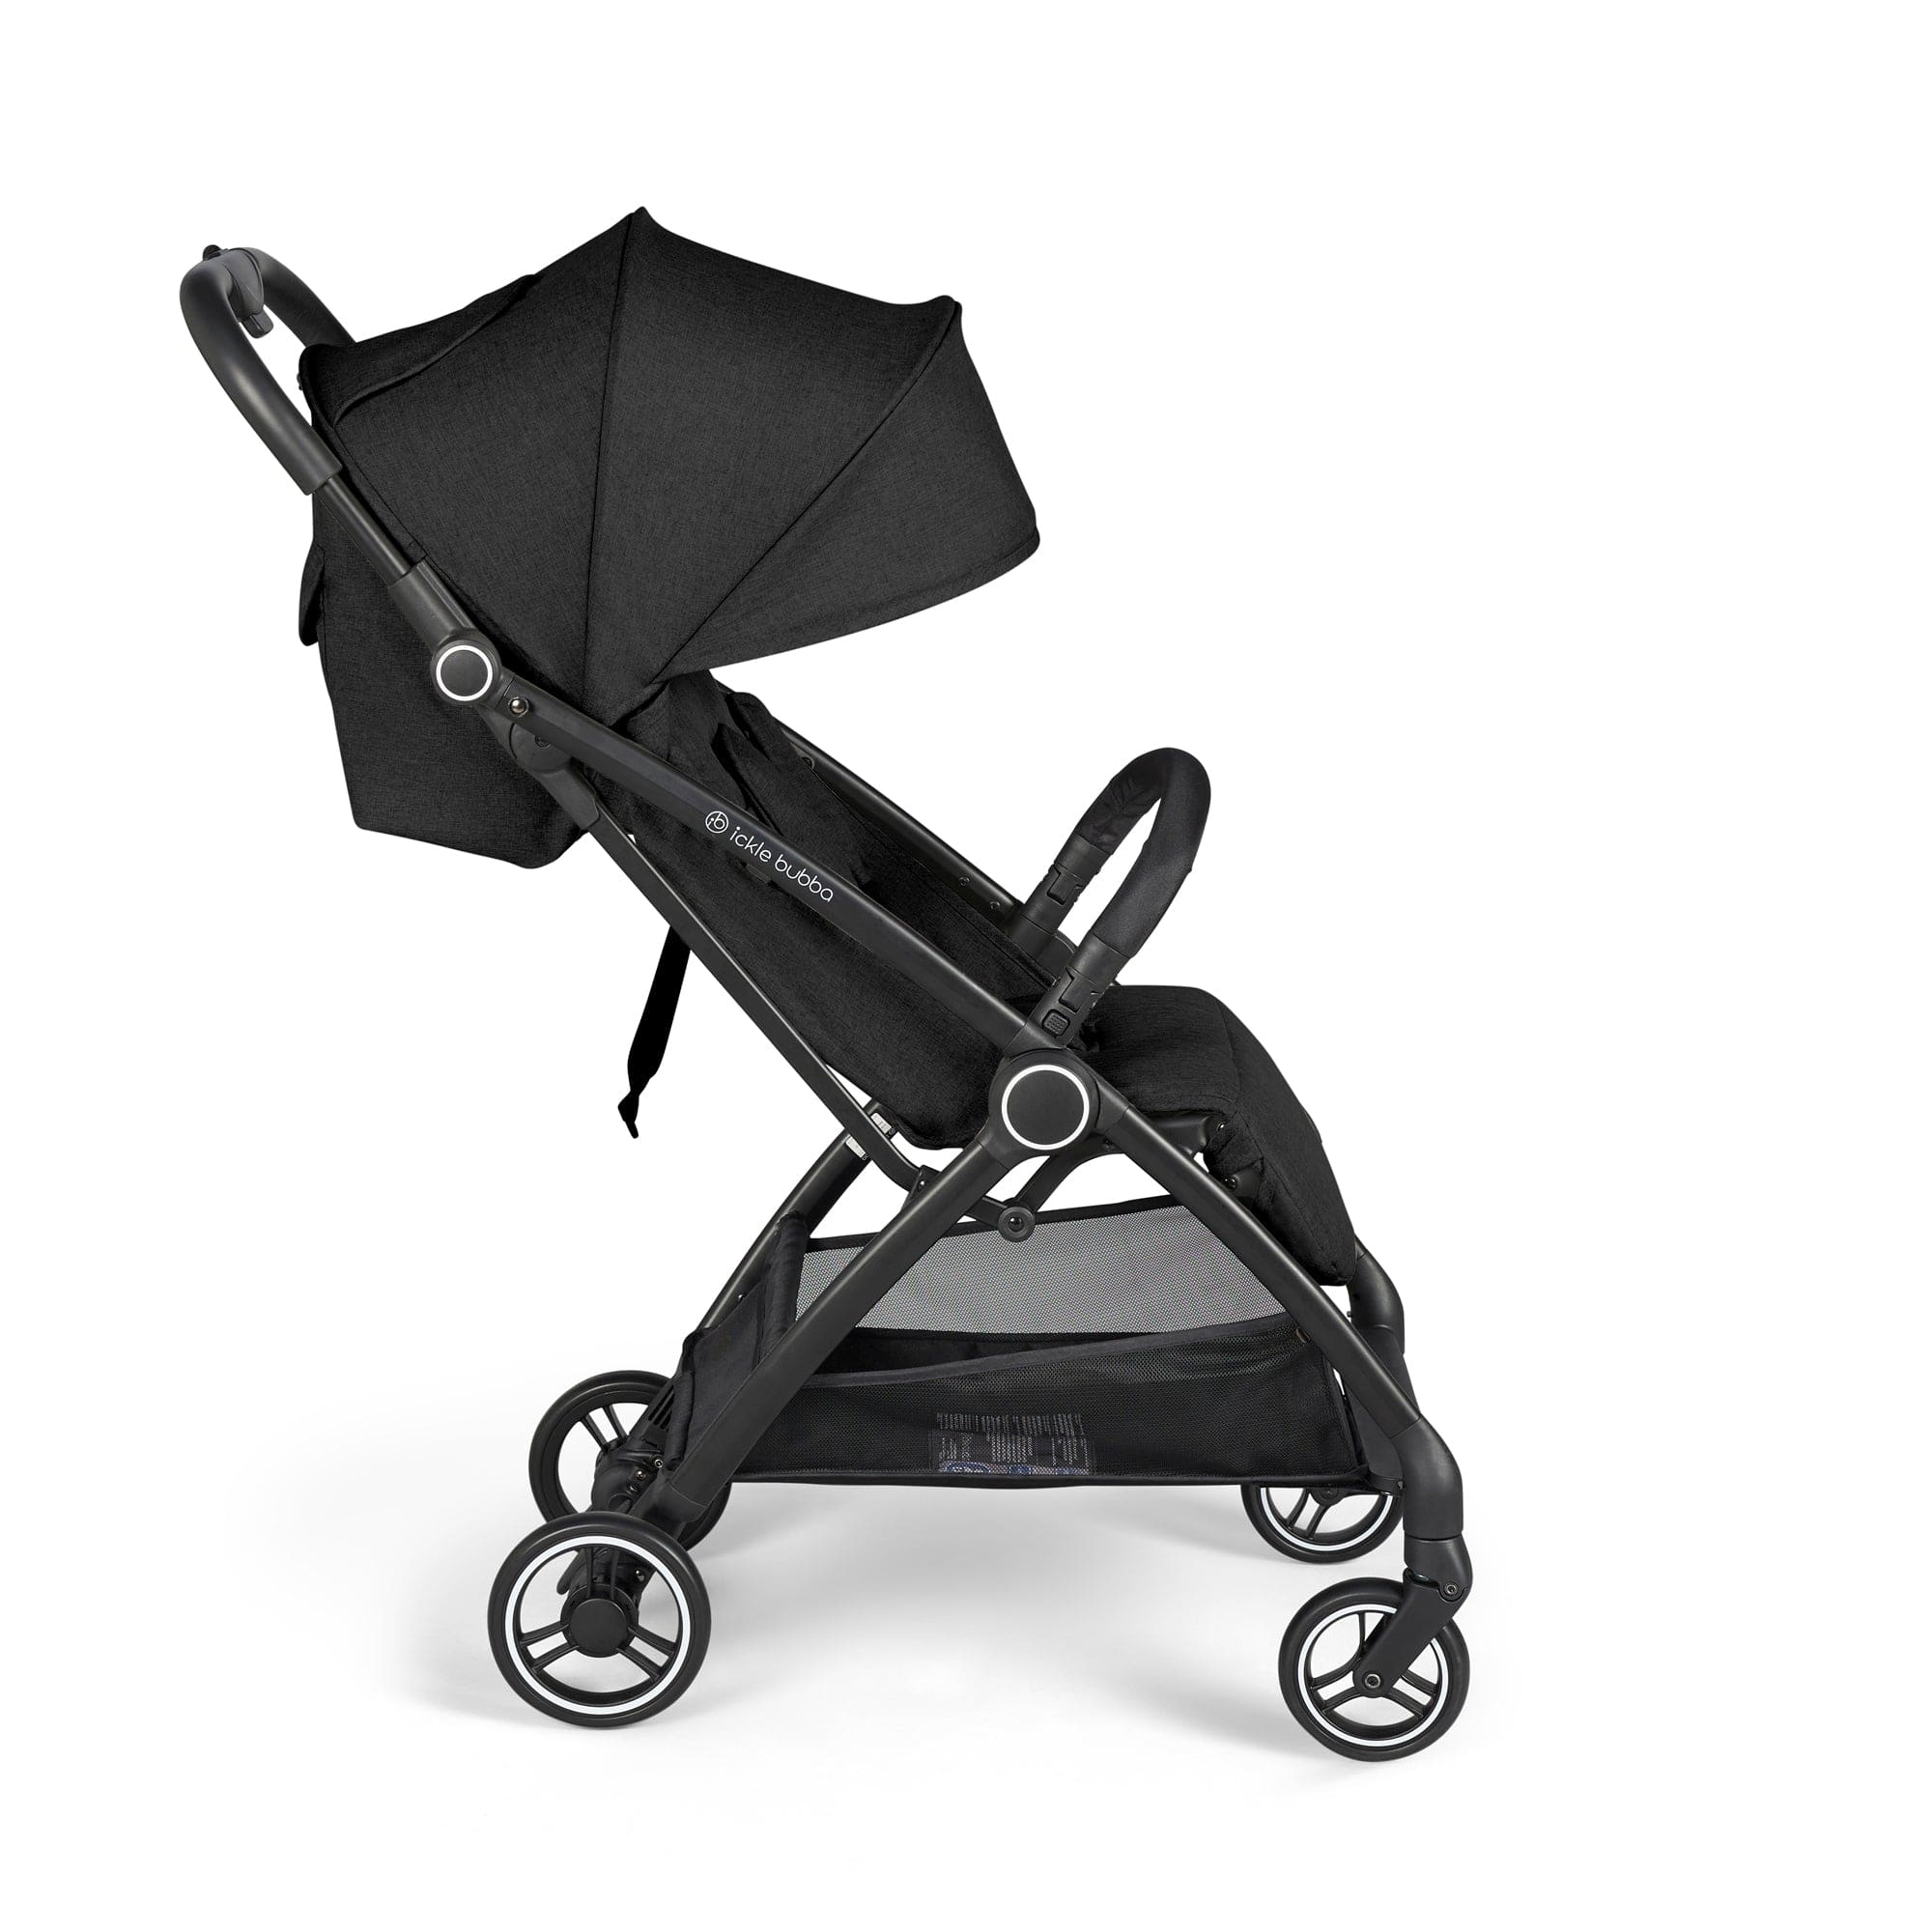 Ickle Bubba Aries Prime Autofold Stroller in Black Pushchairs & Buggies 15-005-300-001 5056515030648